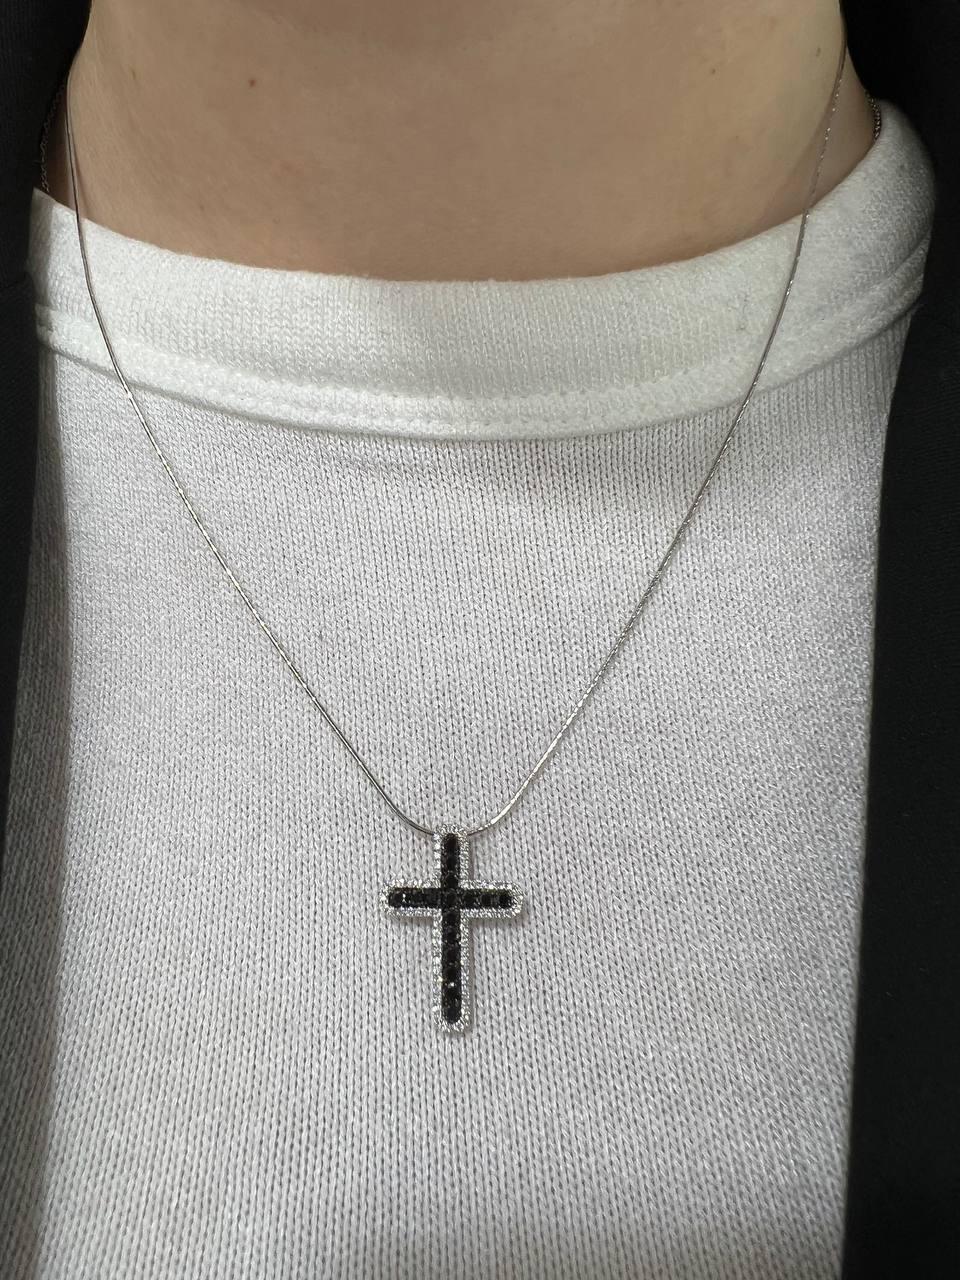 White Gold 14K Cross (Same Model with Black Diamond and Blue Sapphire  Available)
Diamond 68-RND-0,2-G/VS1A
Blue Sapphire 16-0,37 ct

Weight 1,23 grams




It is our honor to create fine jewelry, and it’s for that reason that we choose to only work